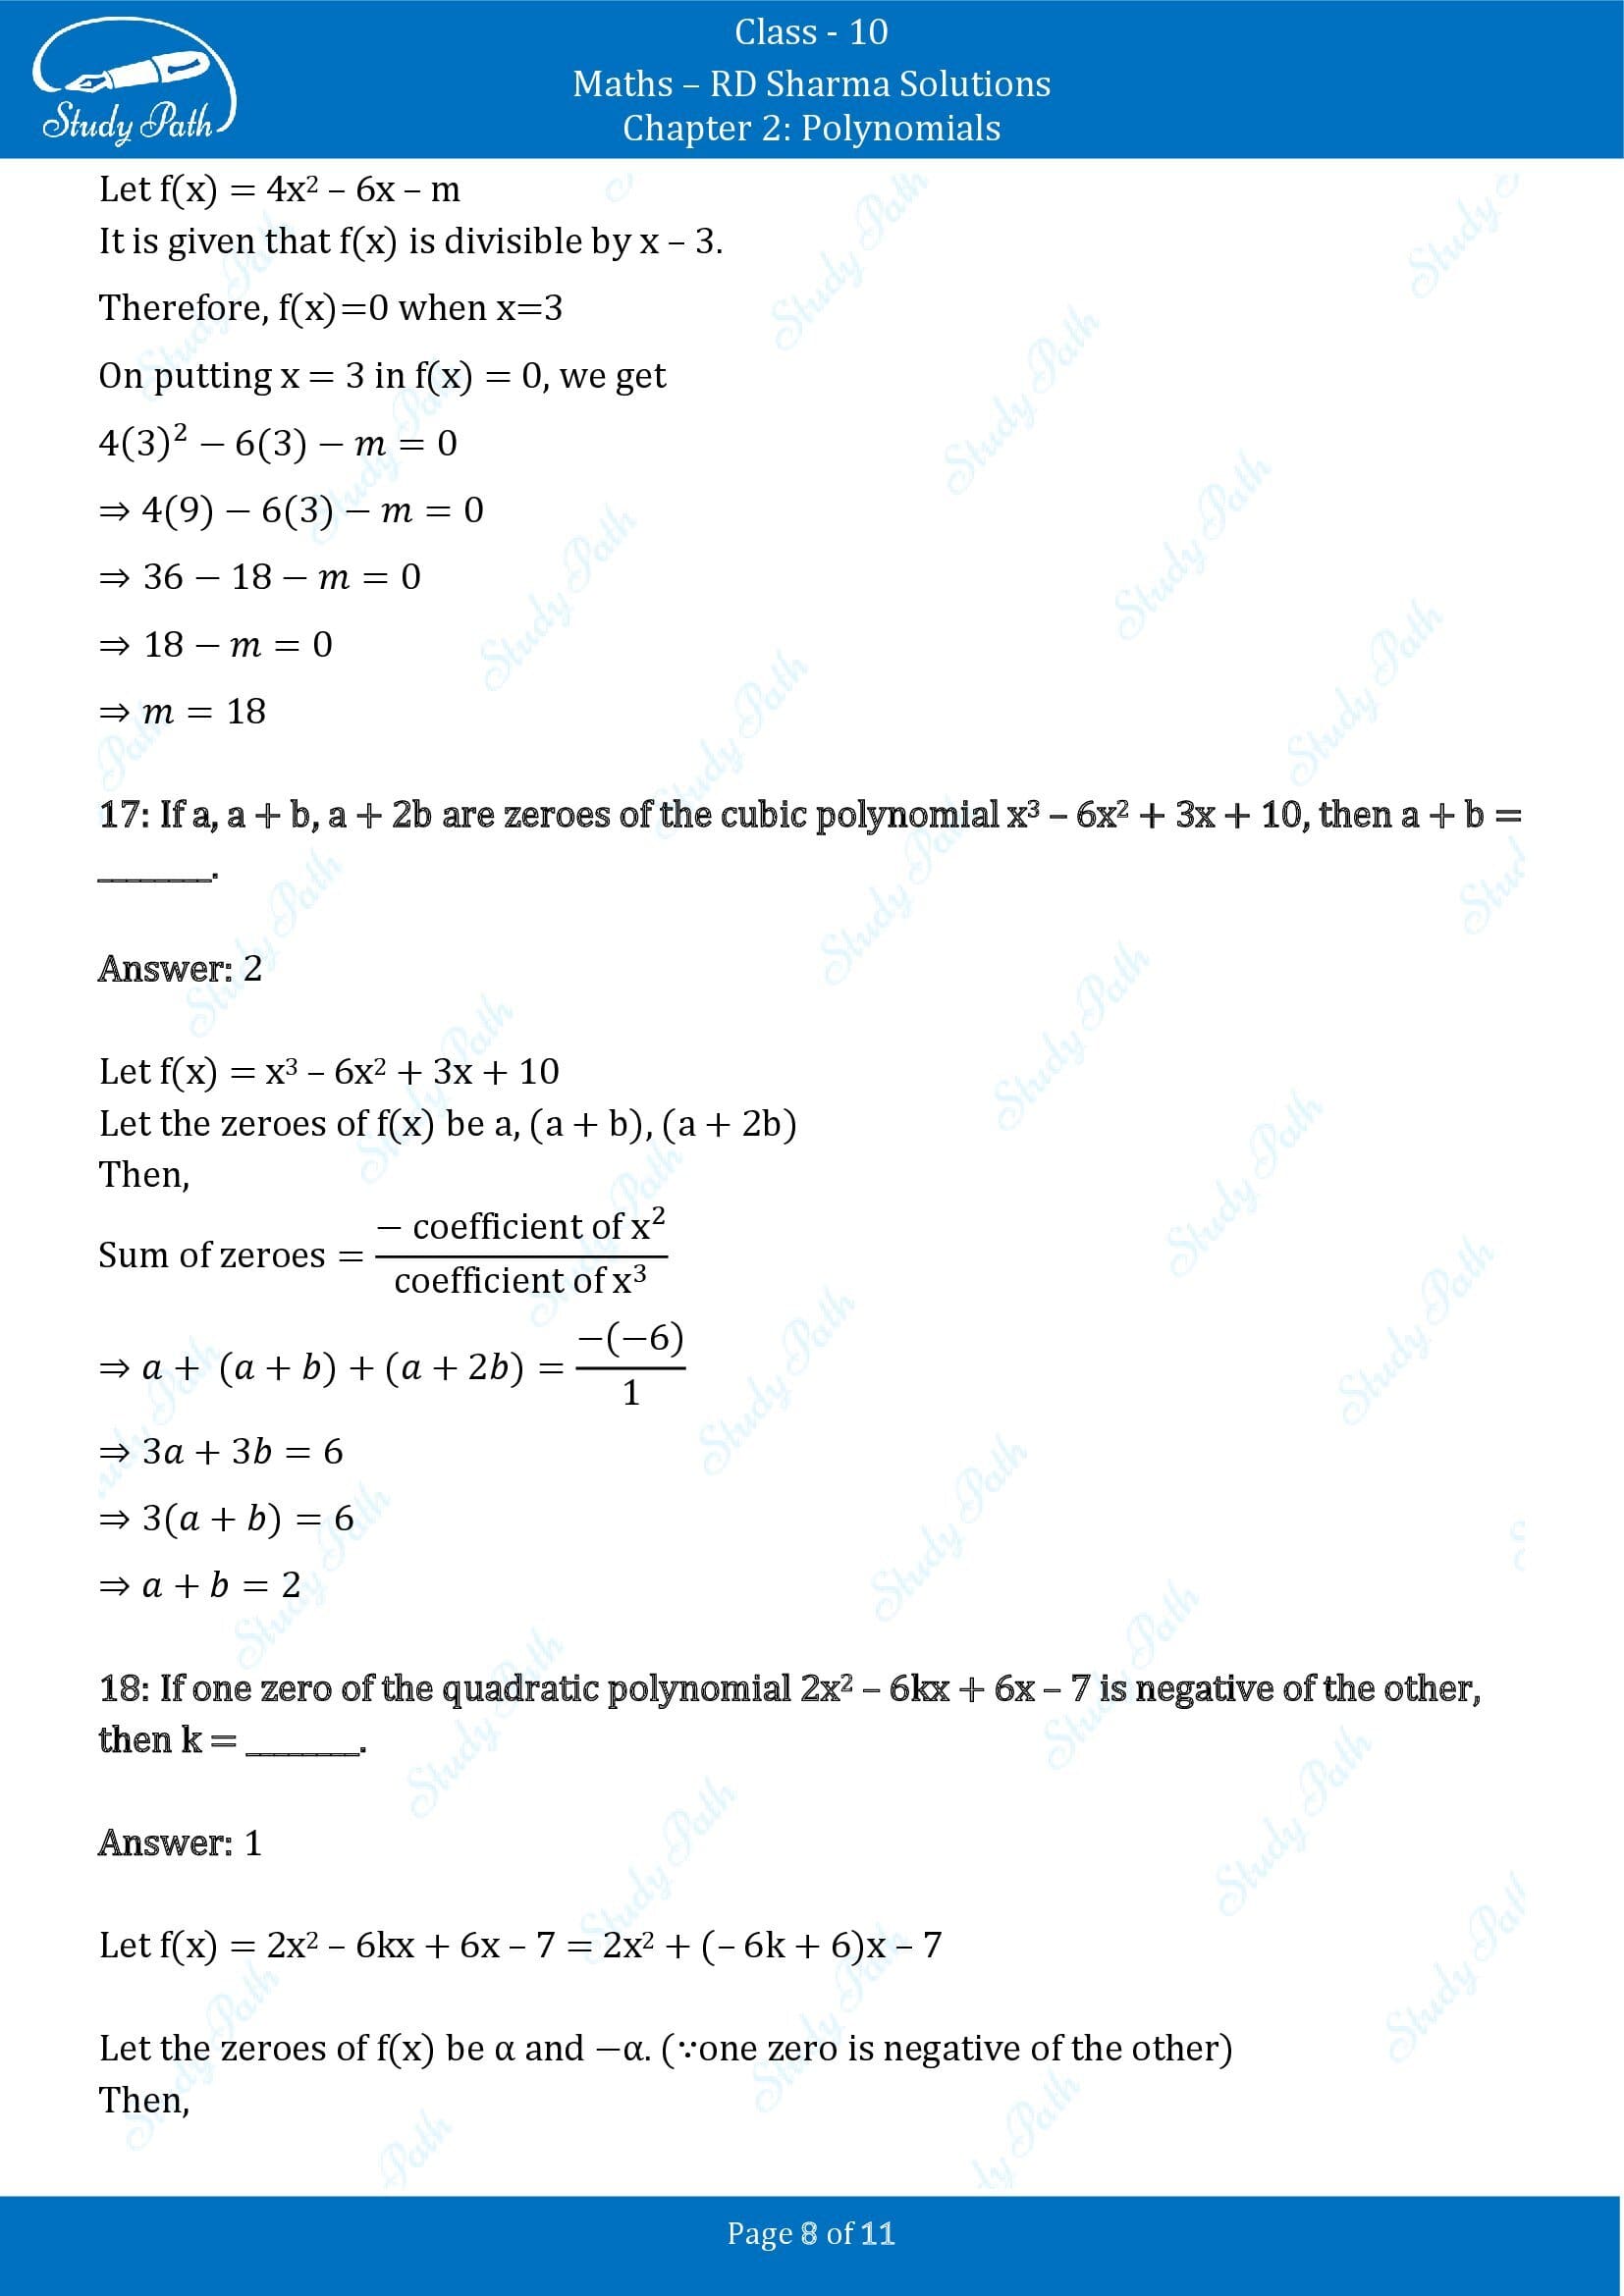 RD Sharma Solutions Class 10 Chapter 2 Polynomials Fill in the Blank Type Questions FBQs 00008